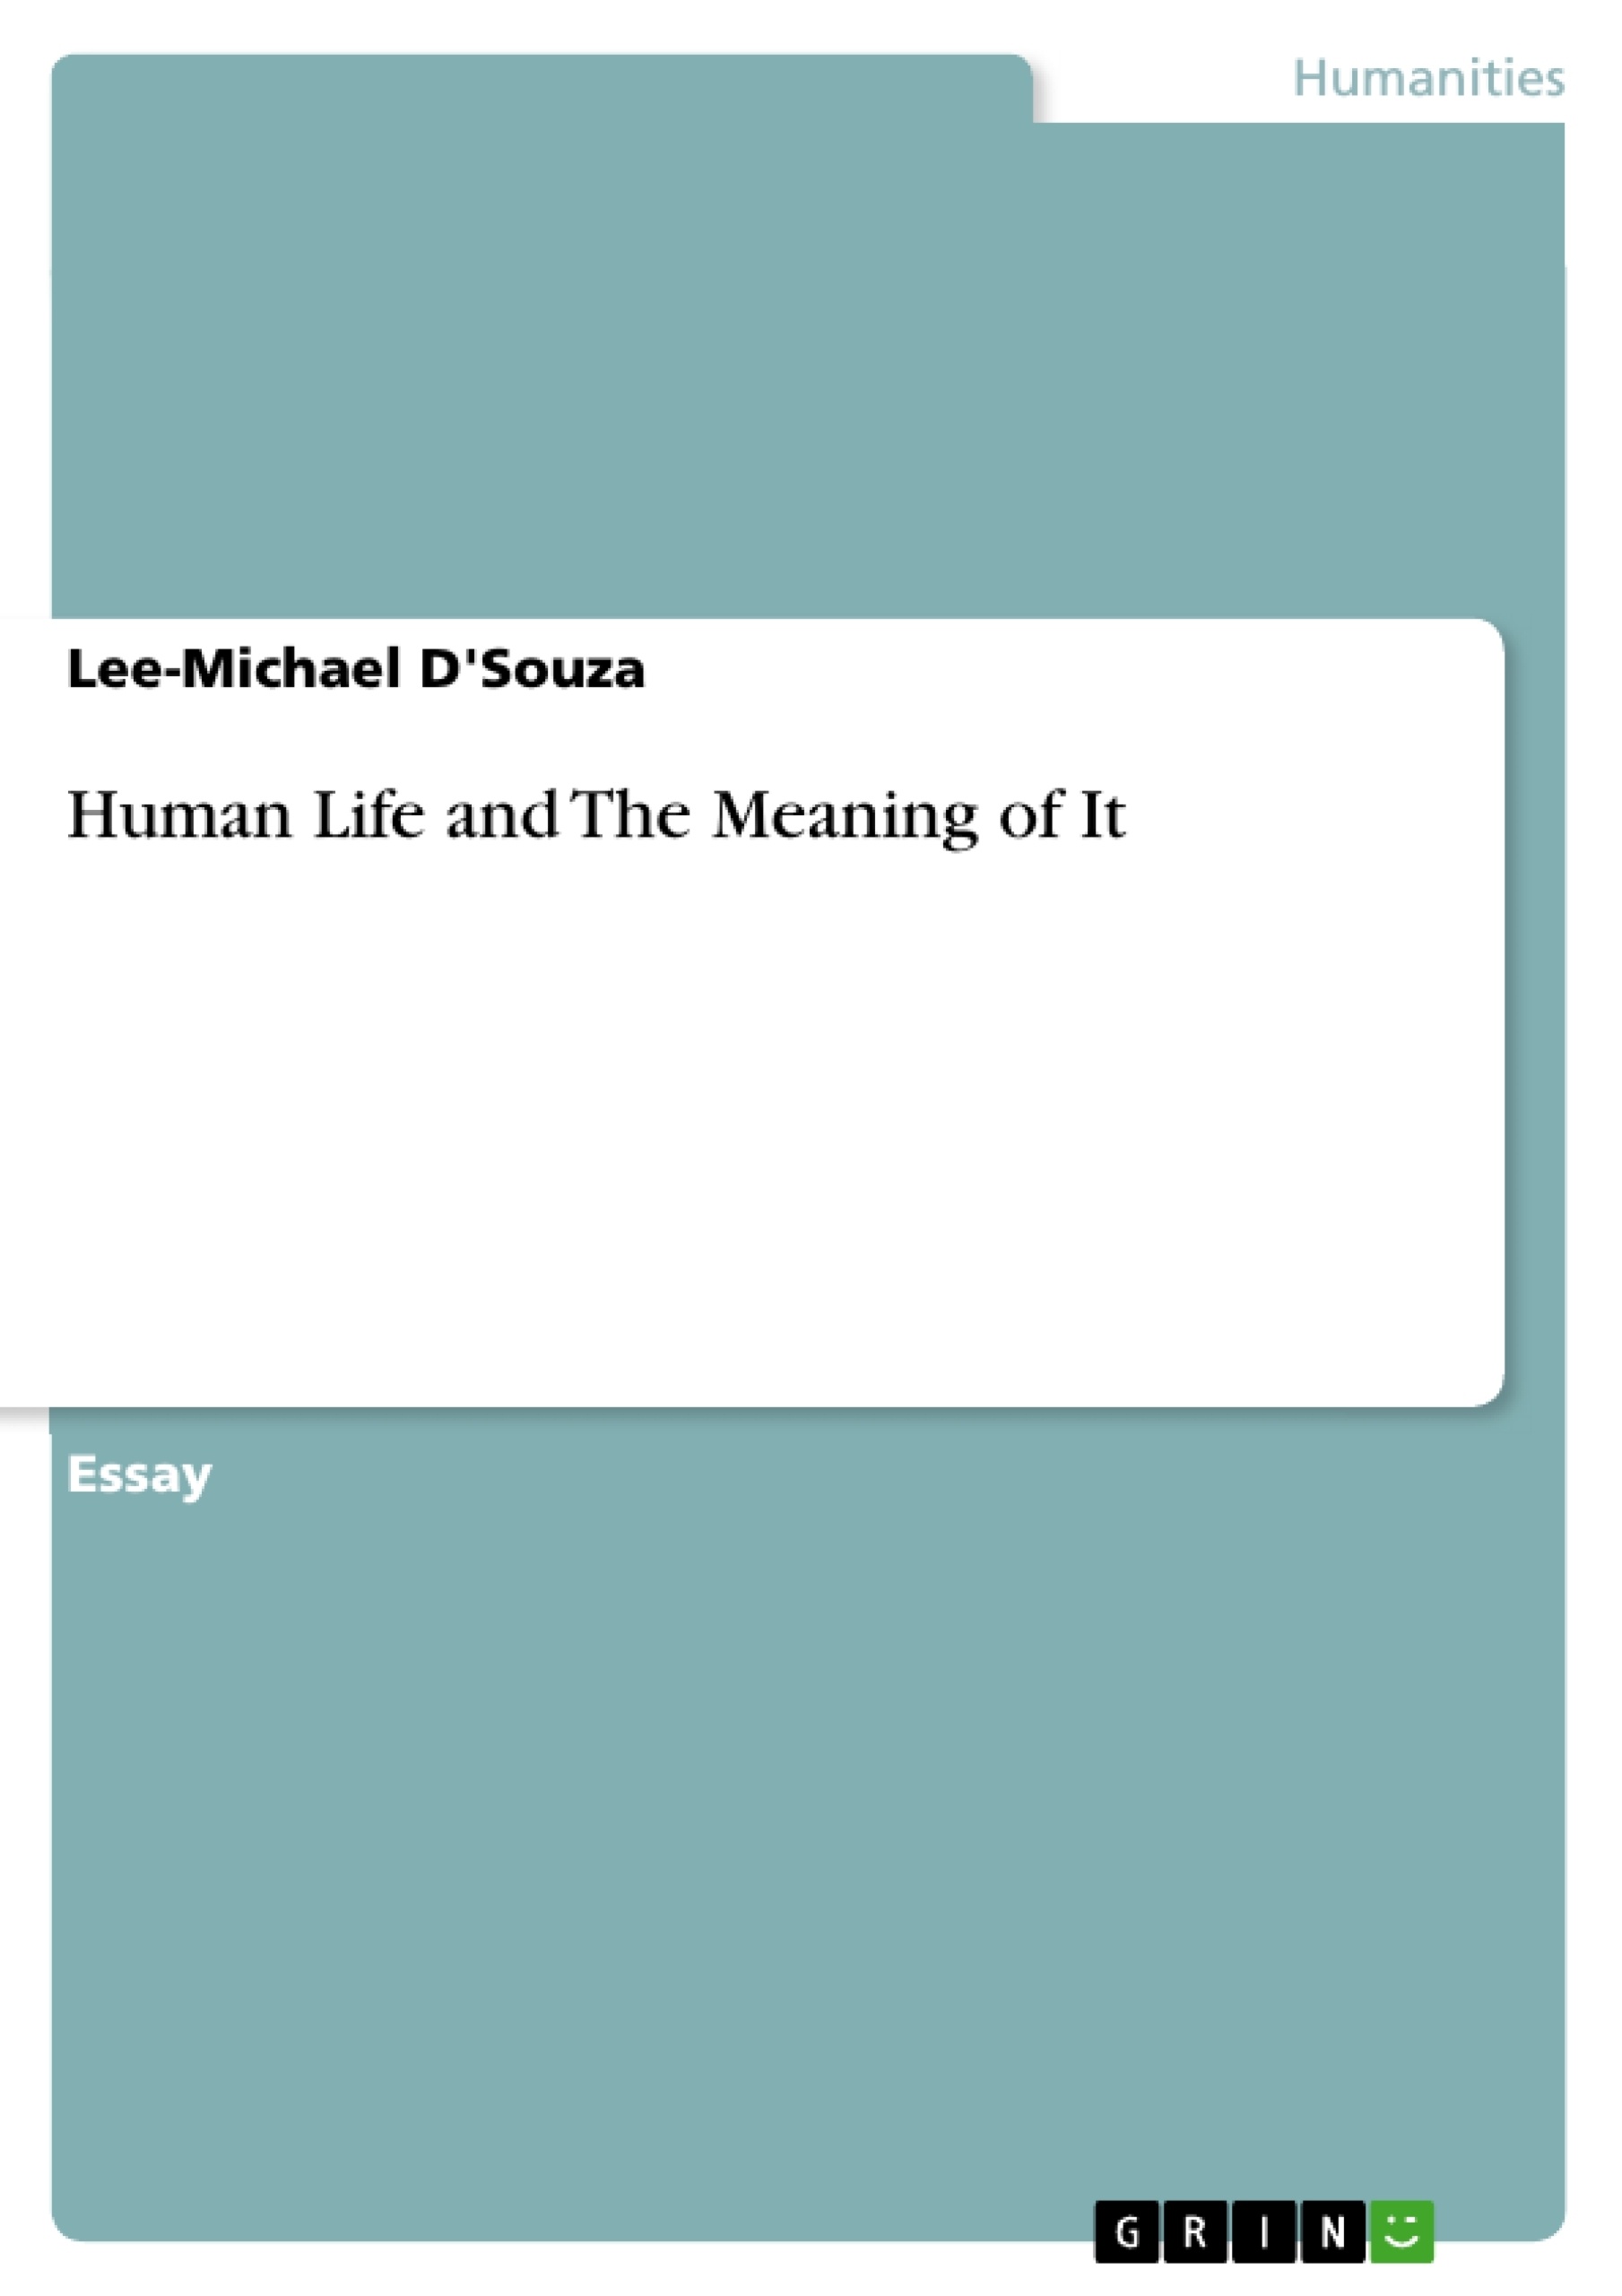 Título: Human Life and The Meaning of It